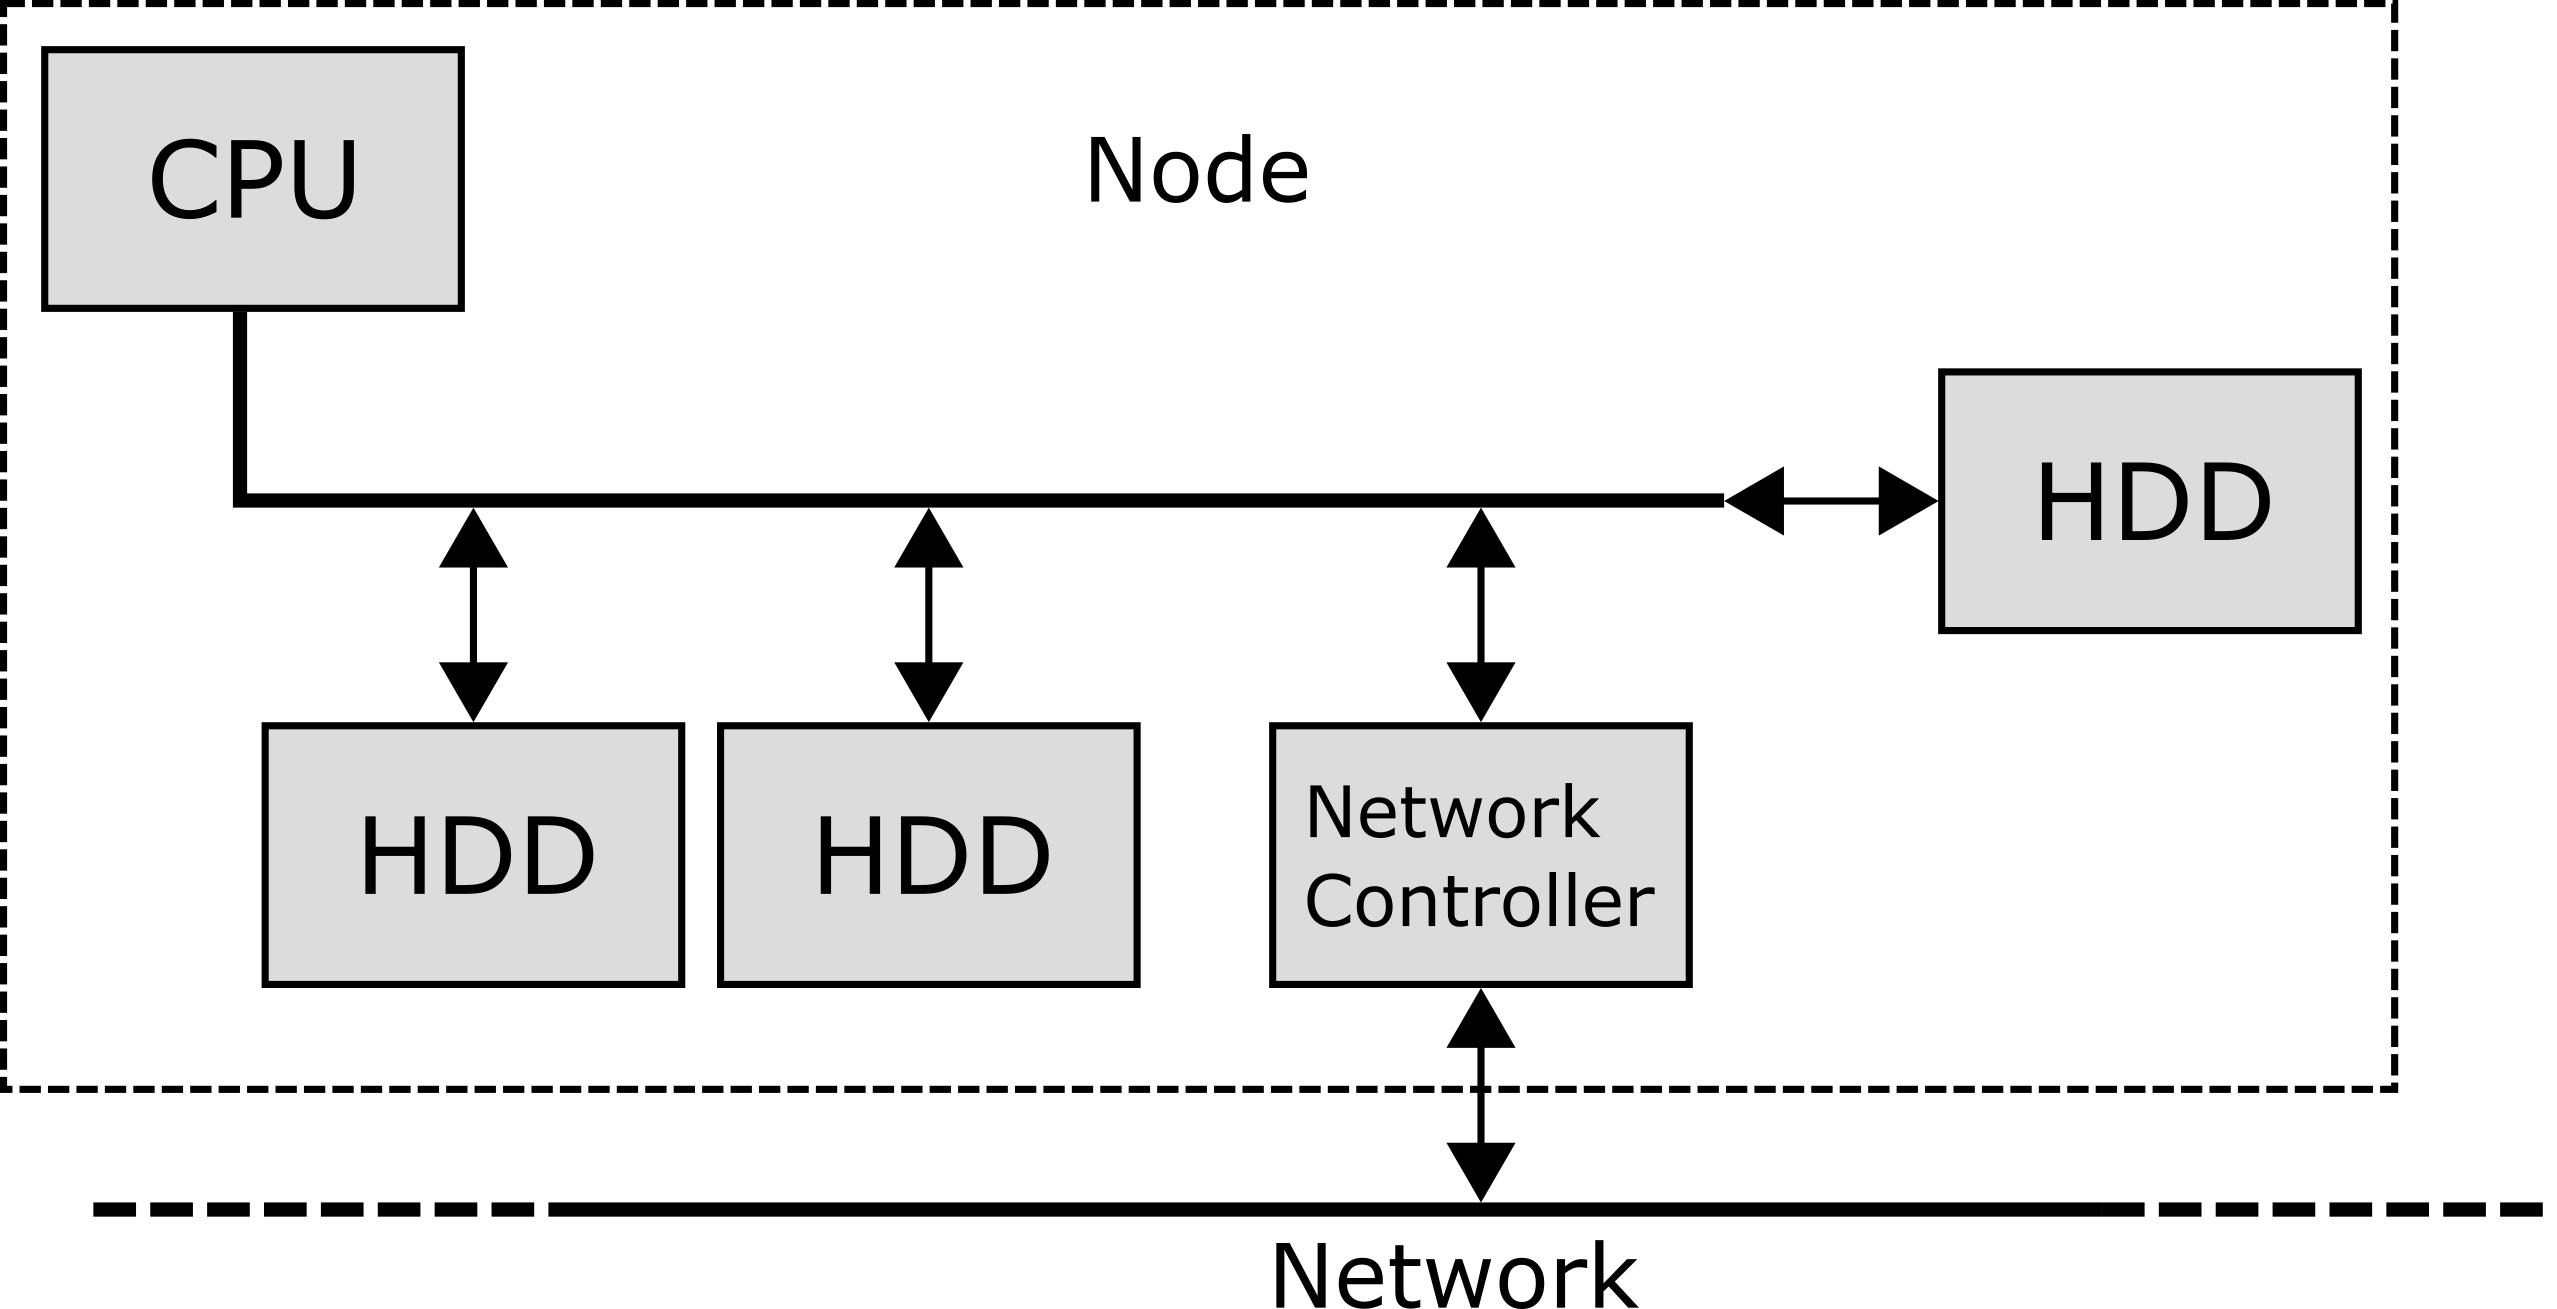 Some drives connected to one CPU in a node, which is connected to a network.